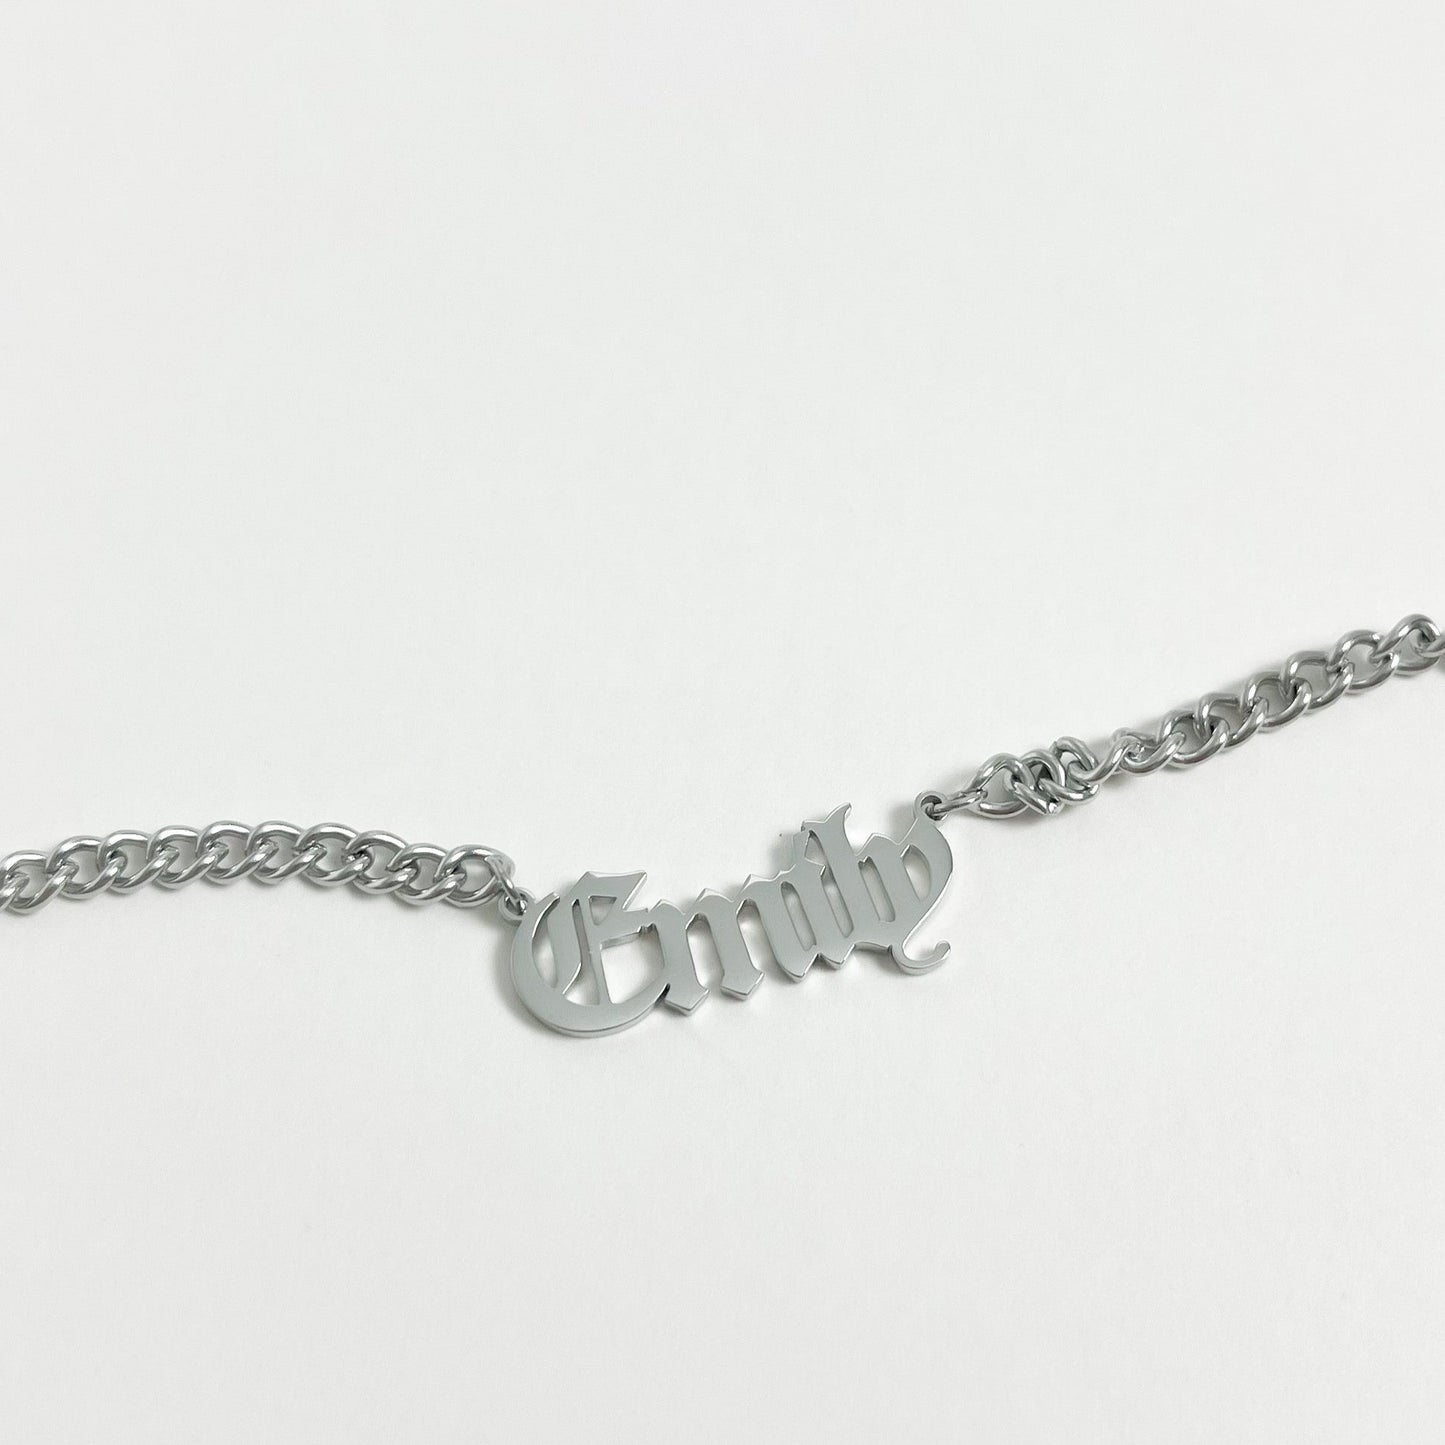 SILVER PERSONALISED BOLD CHAIN NAME NECKLACE